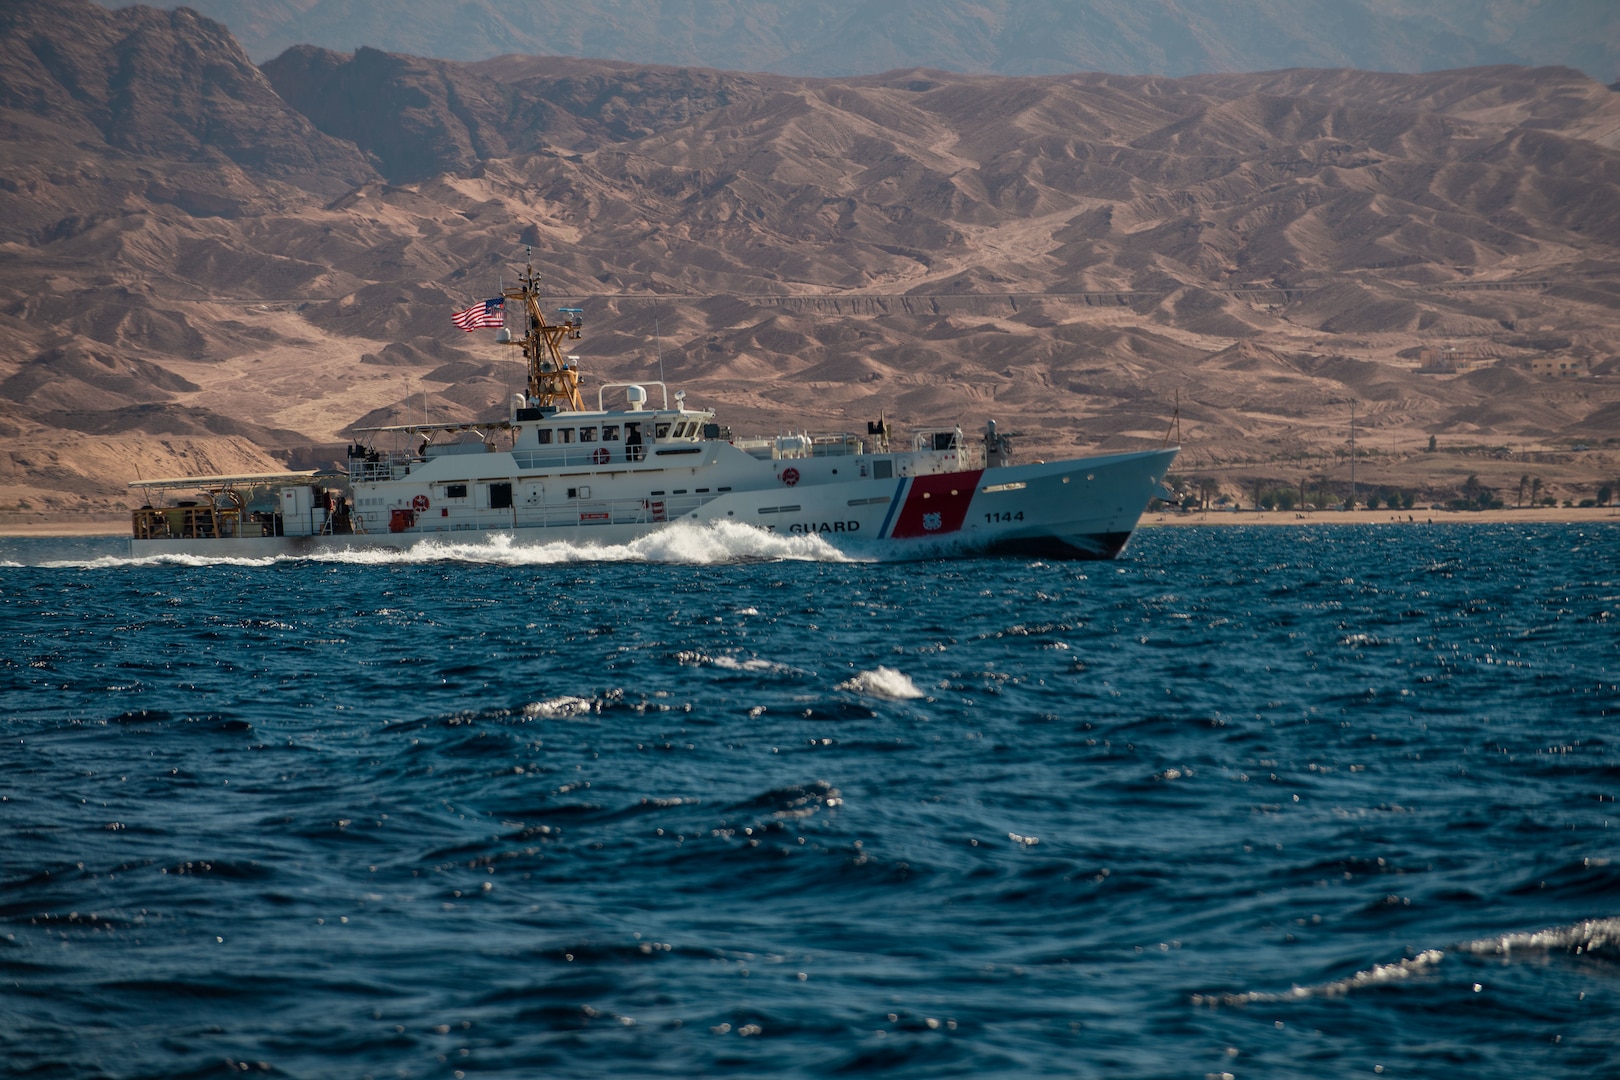 220213-N-KZ419-1032 GULF OF AQABA (Feb. 13, 2022) Fast response cutter USCGC Glen Harris (WPC 1144) sails in the Gulf of Aqaba during International Maritime Exercise/Cutlass Express (IMX/CE) 2022 Feb. 13. IMX/CE 2022 is the largest multinational training event in the Middle East, involving more than 60 nations and international organizations committed to enhancing partnerships and interoperability to strengthen maritime security and stability.